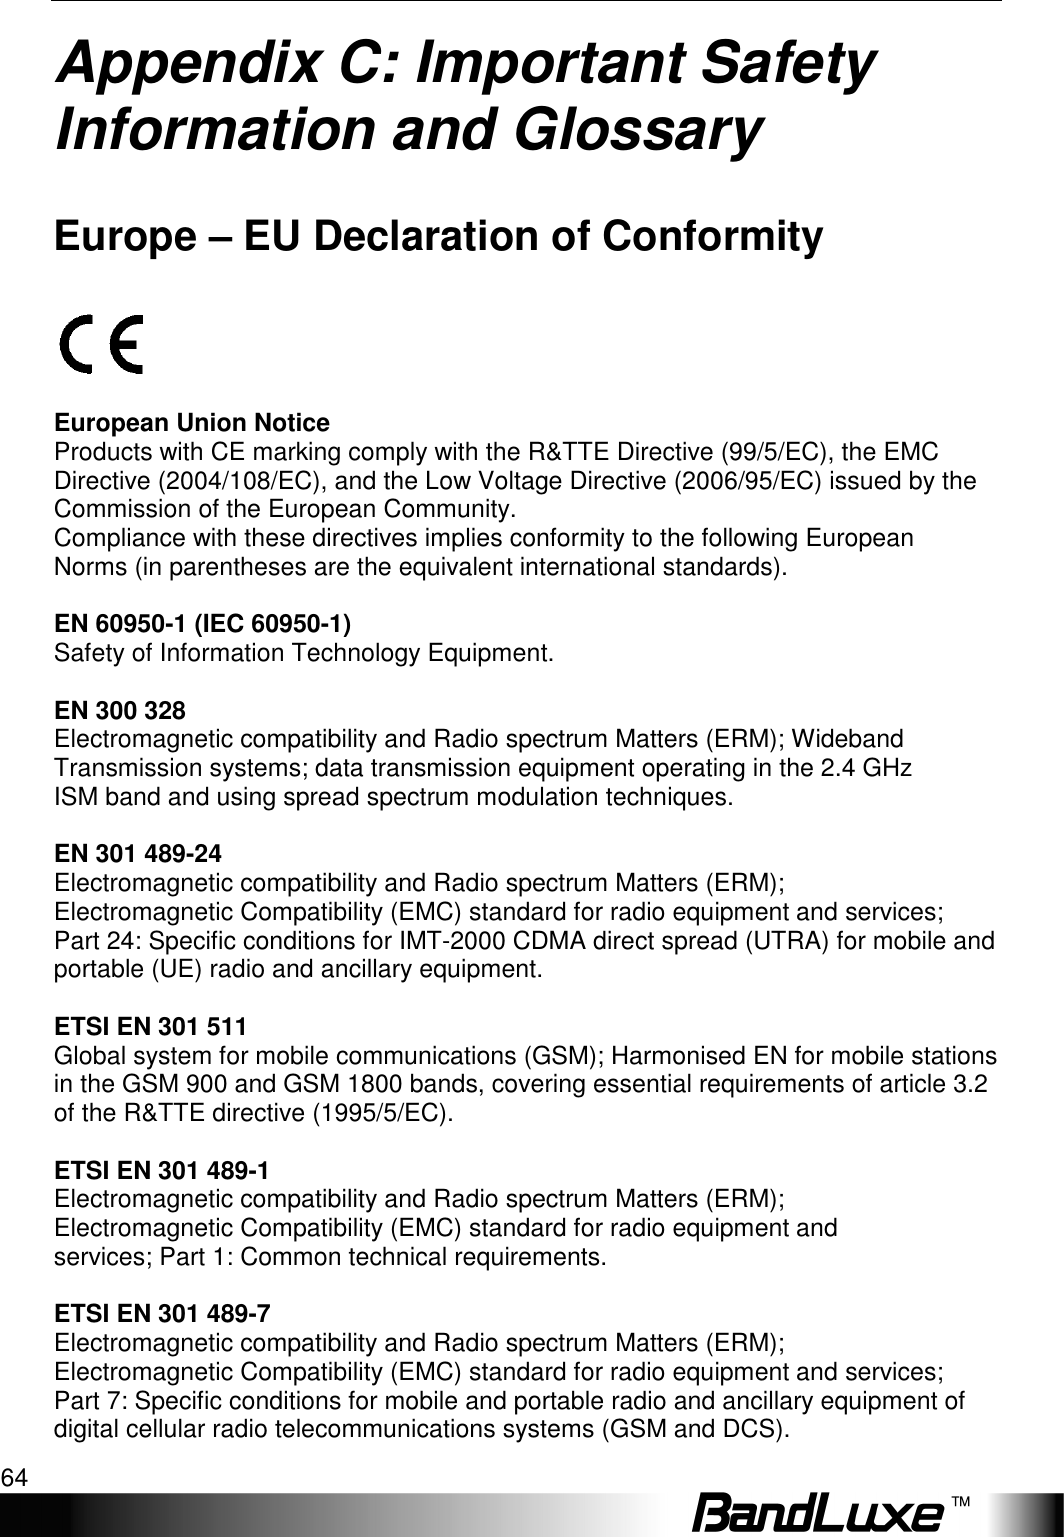 Appendix C: Important Safety Information and Glossary 64  Appendix C: Important Safety Information and Glossary   Europe – EU Declaration of Conformity    European Union Notice Products with CE marking comply with the R&amp;TTE Directive (99/5/EC), the EMC Directive (2004/108/EC), and the Low Voltage Directive (2006/95/EC) issued by the Commission of the European Community. Compliance with these directives implies conformity to the following European Norms (in parentheses are the equivalent international standards).  EN 60950-1 (IEC 60950-1) Safety of Information Technology Equipment.  EN 300 328 Electromagnetic compatibility and Radio spectrum Matters (ERM); Wideband Transmission systems; data transmission equipment operating in the 2.4 GHz ISM band and using spread spectrum modulation techniques.  EN 301 489-24 Electromagnetic compatibility and Radio spectrum Matters (ERM); Electromagnetic Compatibility (EMC) standard for radio equipment and services; Part 24: Specific conditions for IMT-2000 CDMA direct spread (UTRA) for mobile and portable (UE) radio and ancillary equipment.  ETSI EN 301 511 Global system for mobile communications (GSM); Harmonised EN for mobile stations in the GSM 900 and GSM 1800 bands, covering essential requirements of article 3.2 of the R&amp;TTE directive (1995/5/EC).  ETSI EN 301 489-1 Electromagnetic compatibility and Radio spectrum Matters (ERM); Electromagnetic Compatibility (EMC) standard for radio equipment and services; Part 1: Common technical requirements.  ETSI EN 301 489-7 Electromagnetic compatibility and Radio spectrum Matters (ERM); Electromagnetic Compatibility (EMC) standard for radio equipment and services; Part 7: Specific conditions for mobile and portable radio and ancillary equipment of digital cellular radio telecommunications systems (GSM and DCS). 